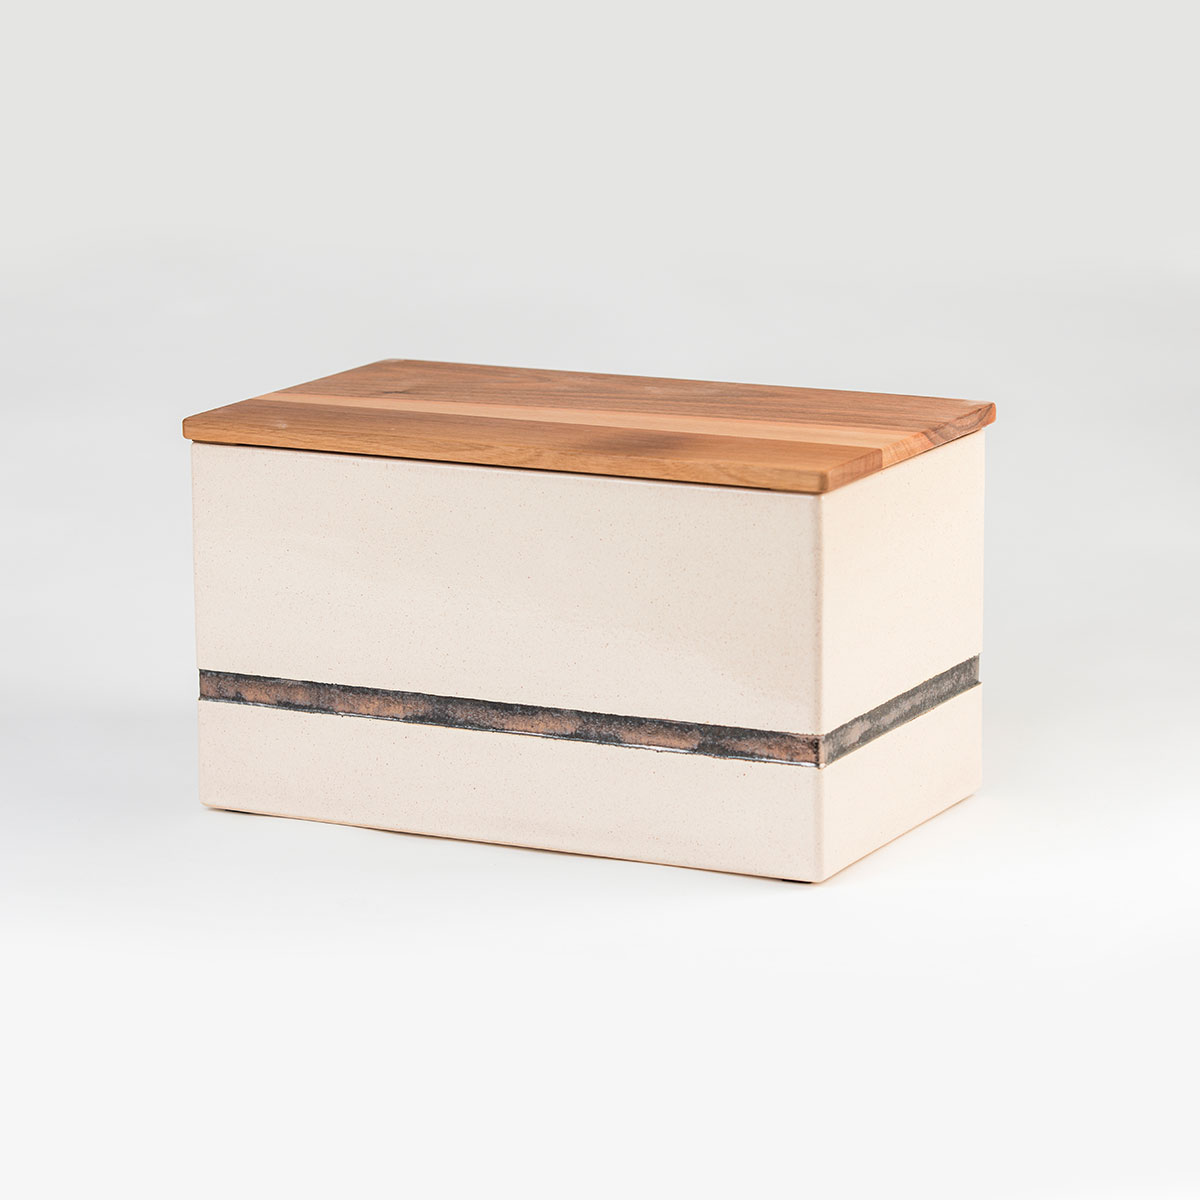 Ceramic bread box with wooden lid